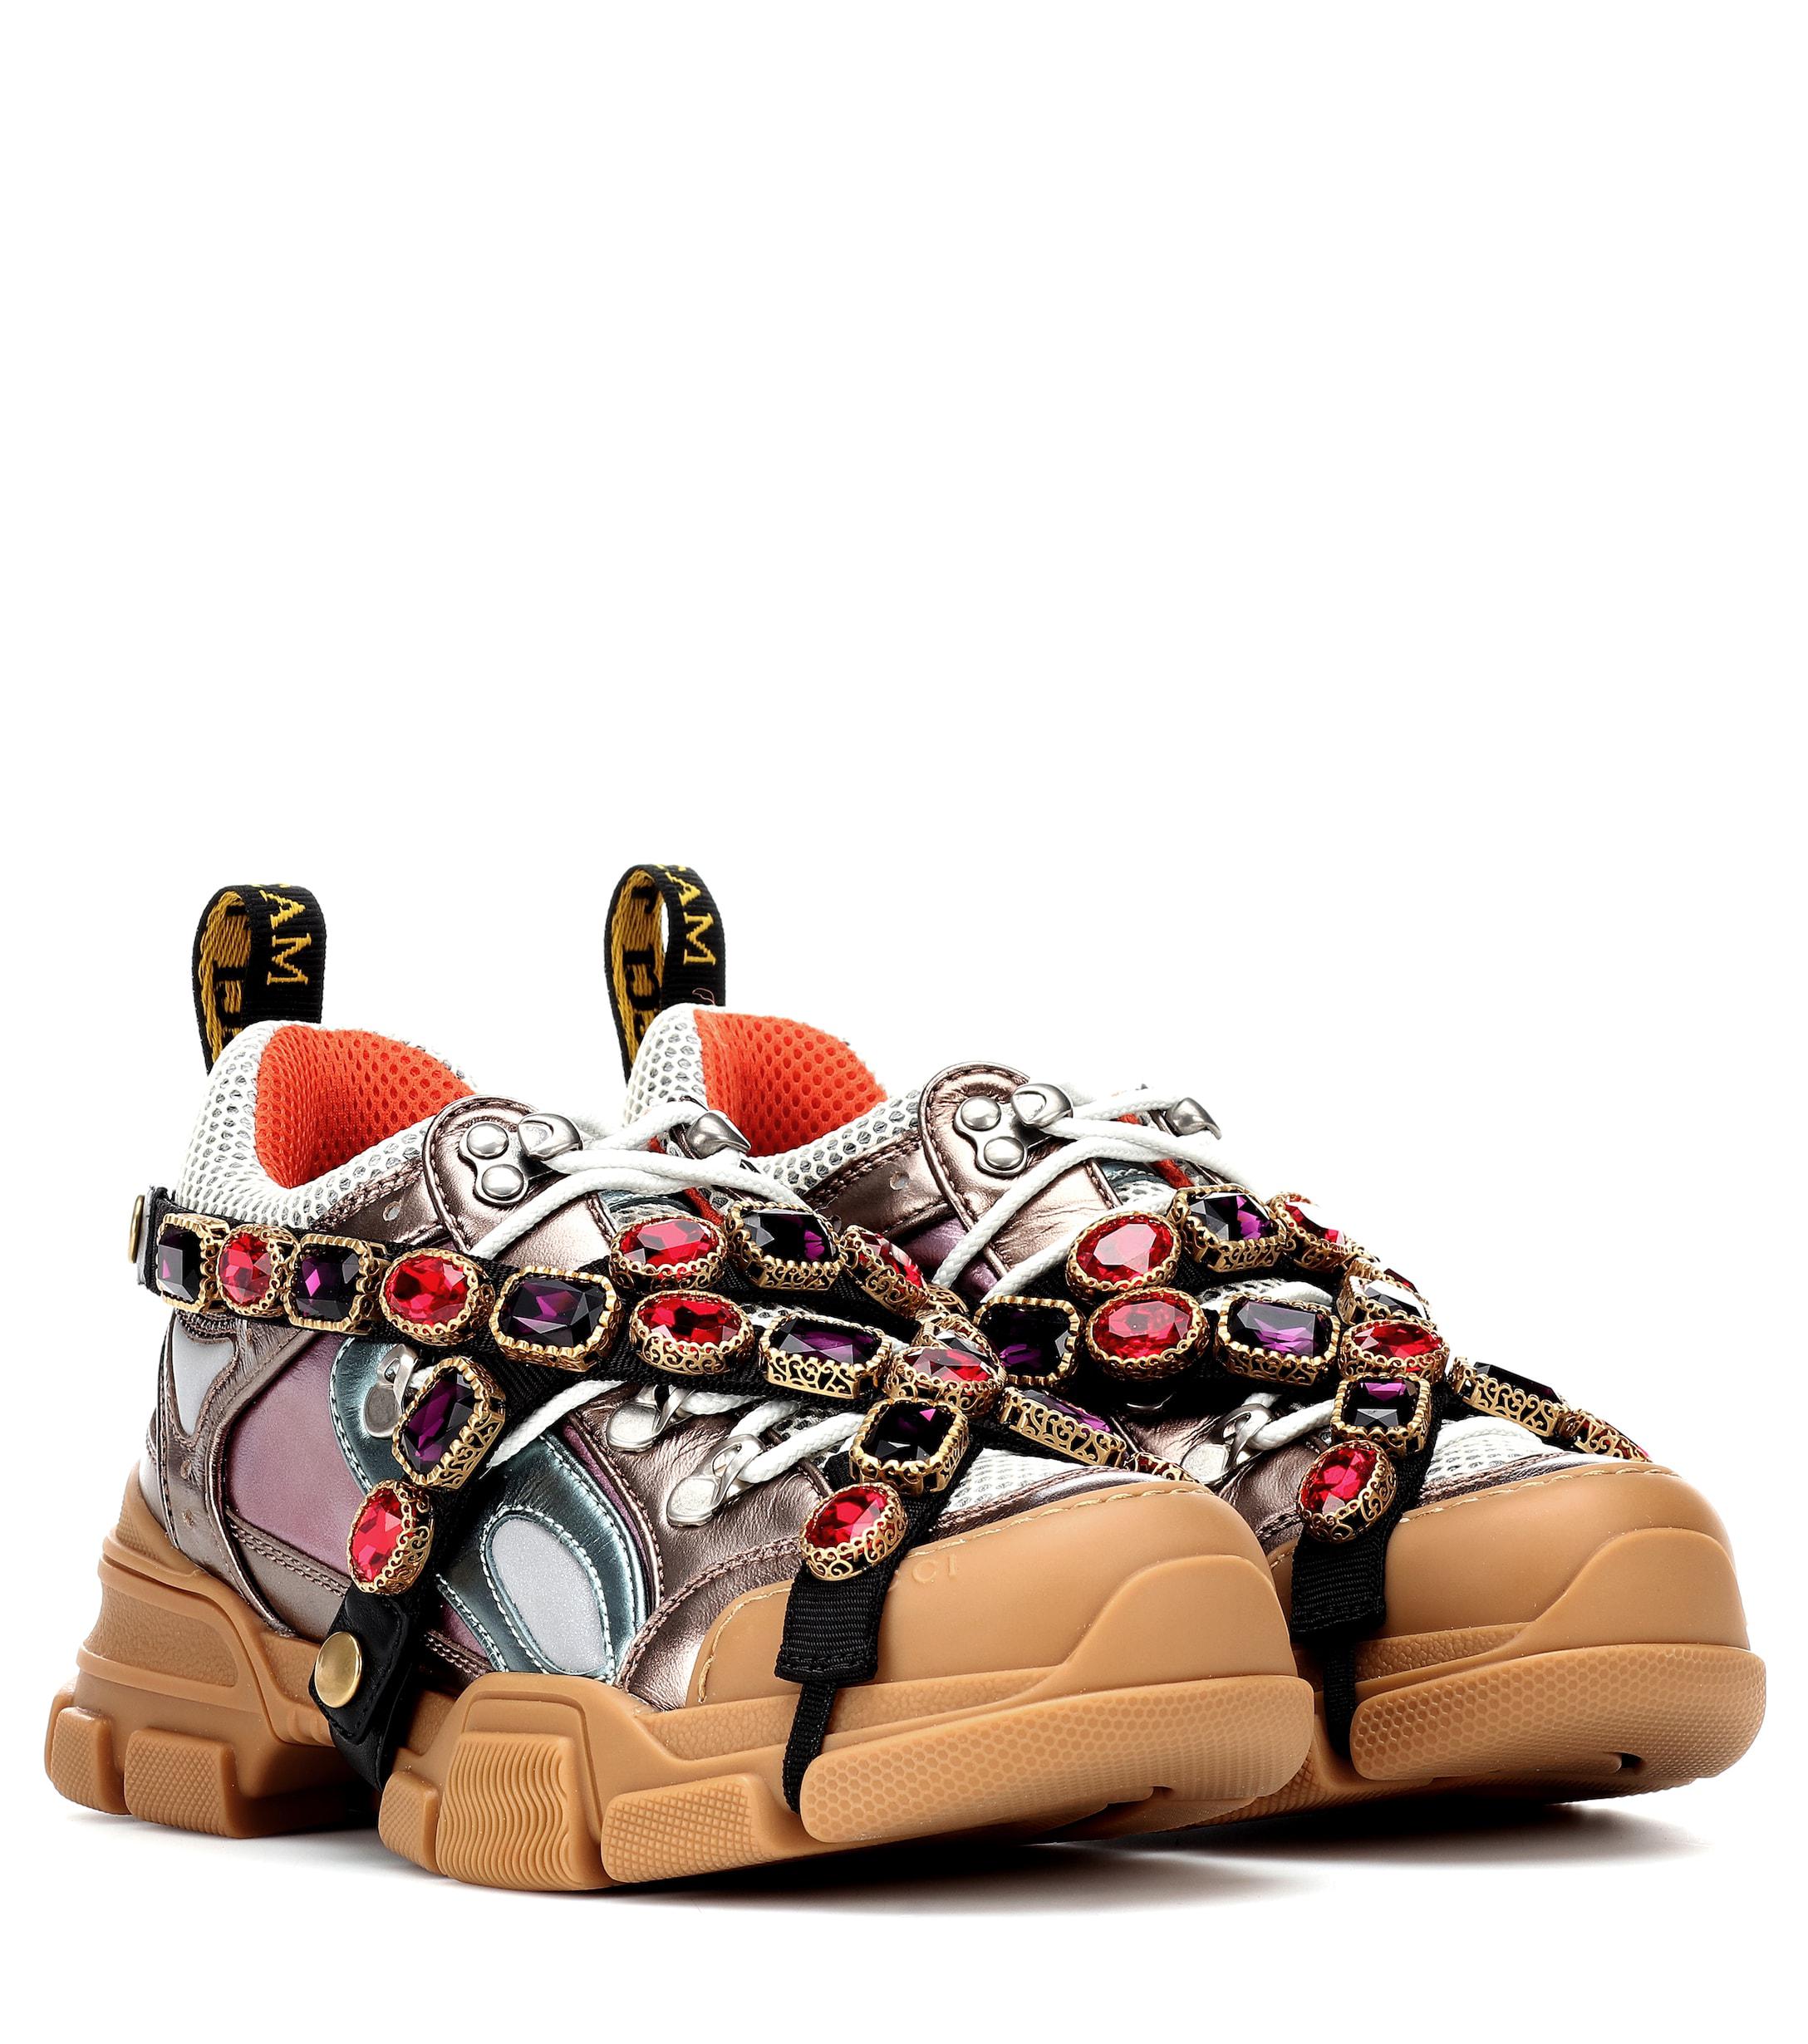 Lyst - Gucci Flashtrek Embellished Sneakers